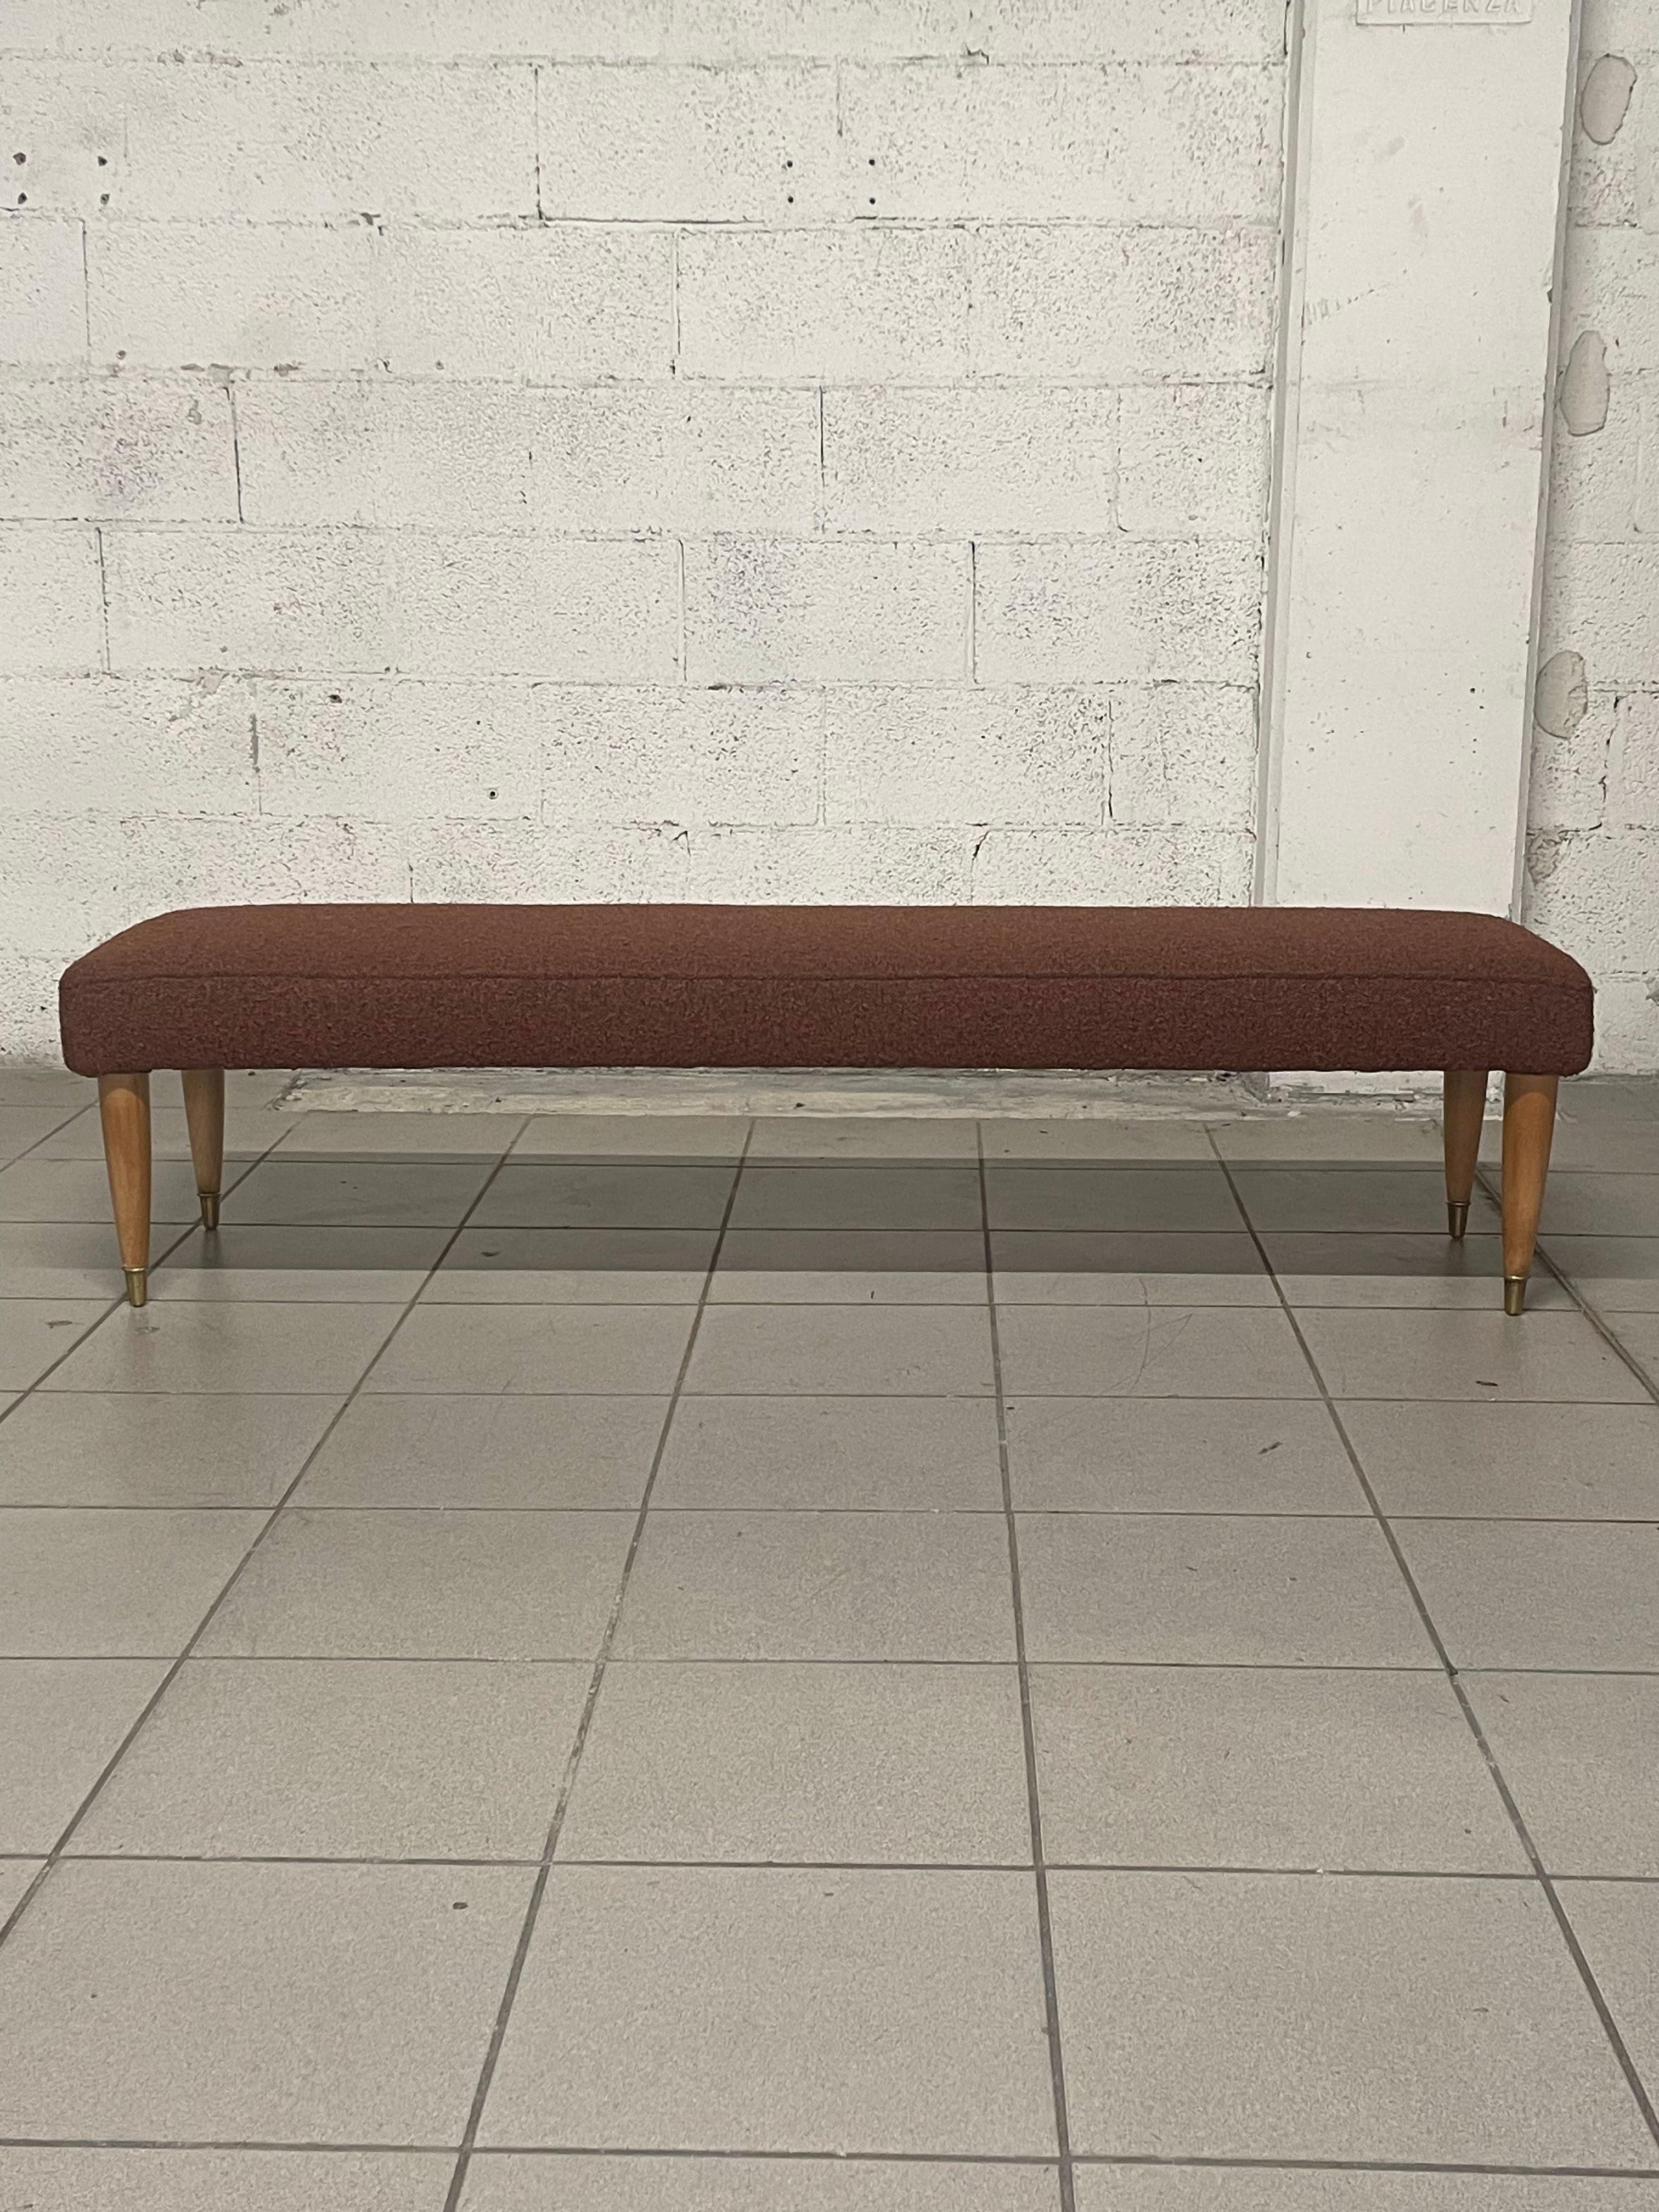 Large restored 1950s bench with maple wood legs and brass ferrules.

New rust-colored boucle' upholstery gives the bench an understated elegance in keeping with the colors of the original period.